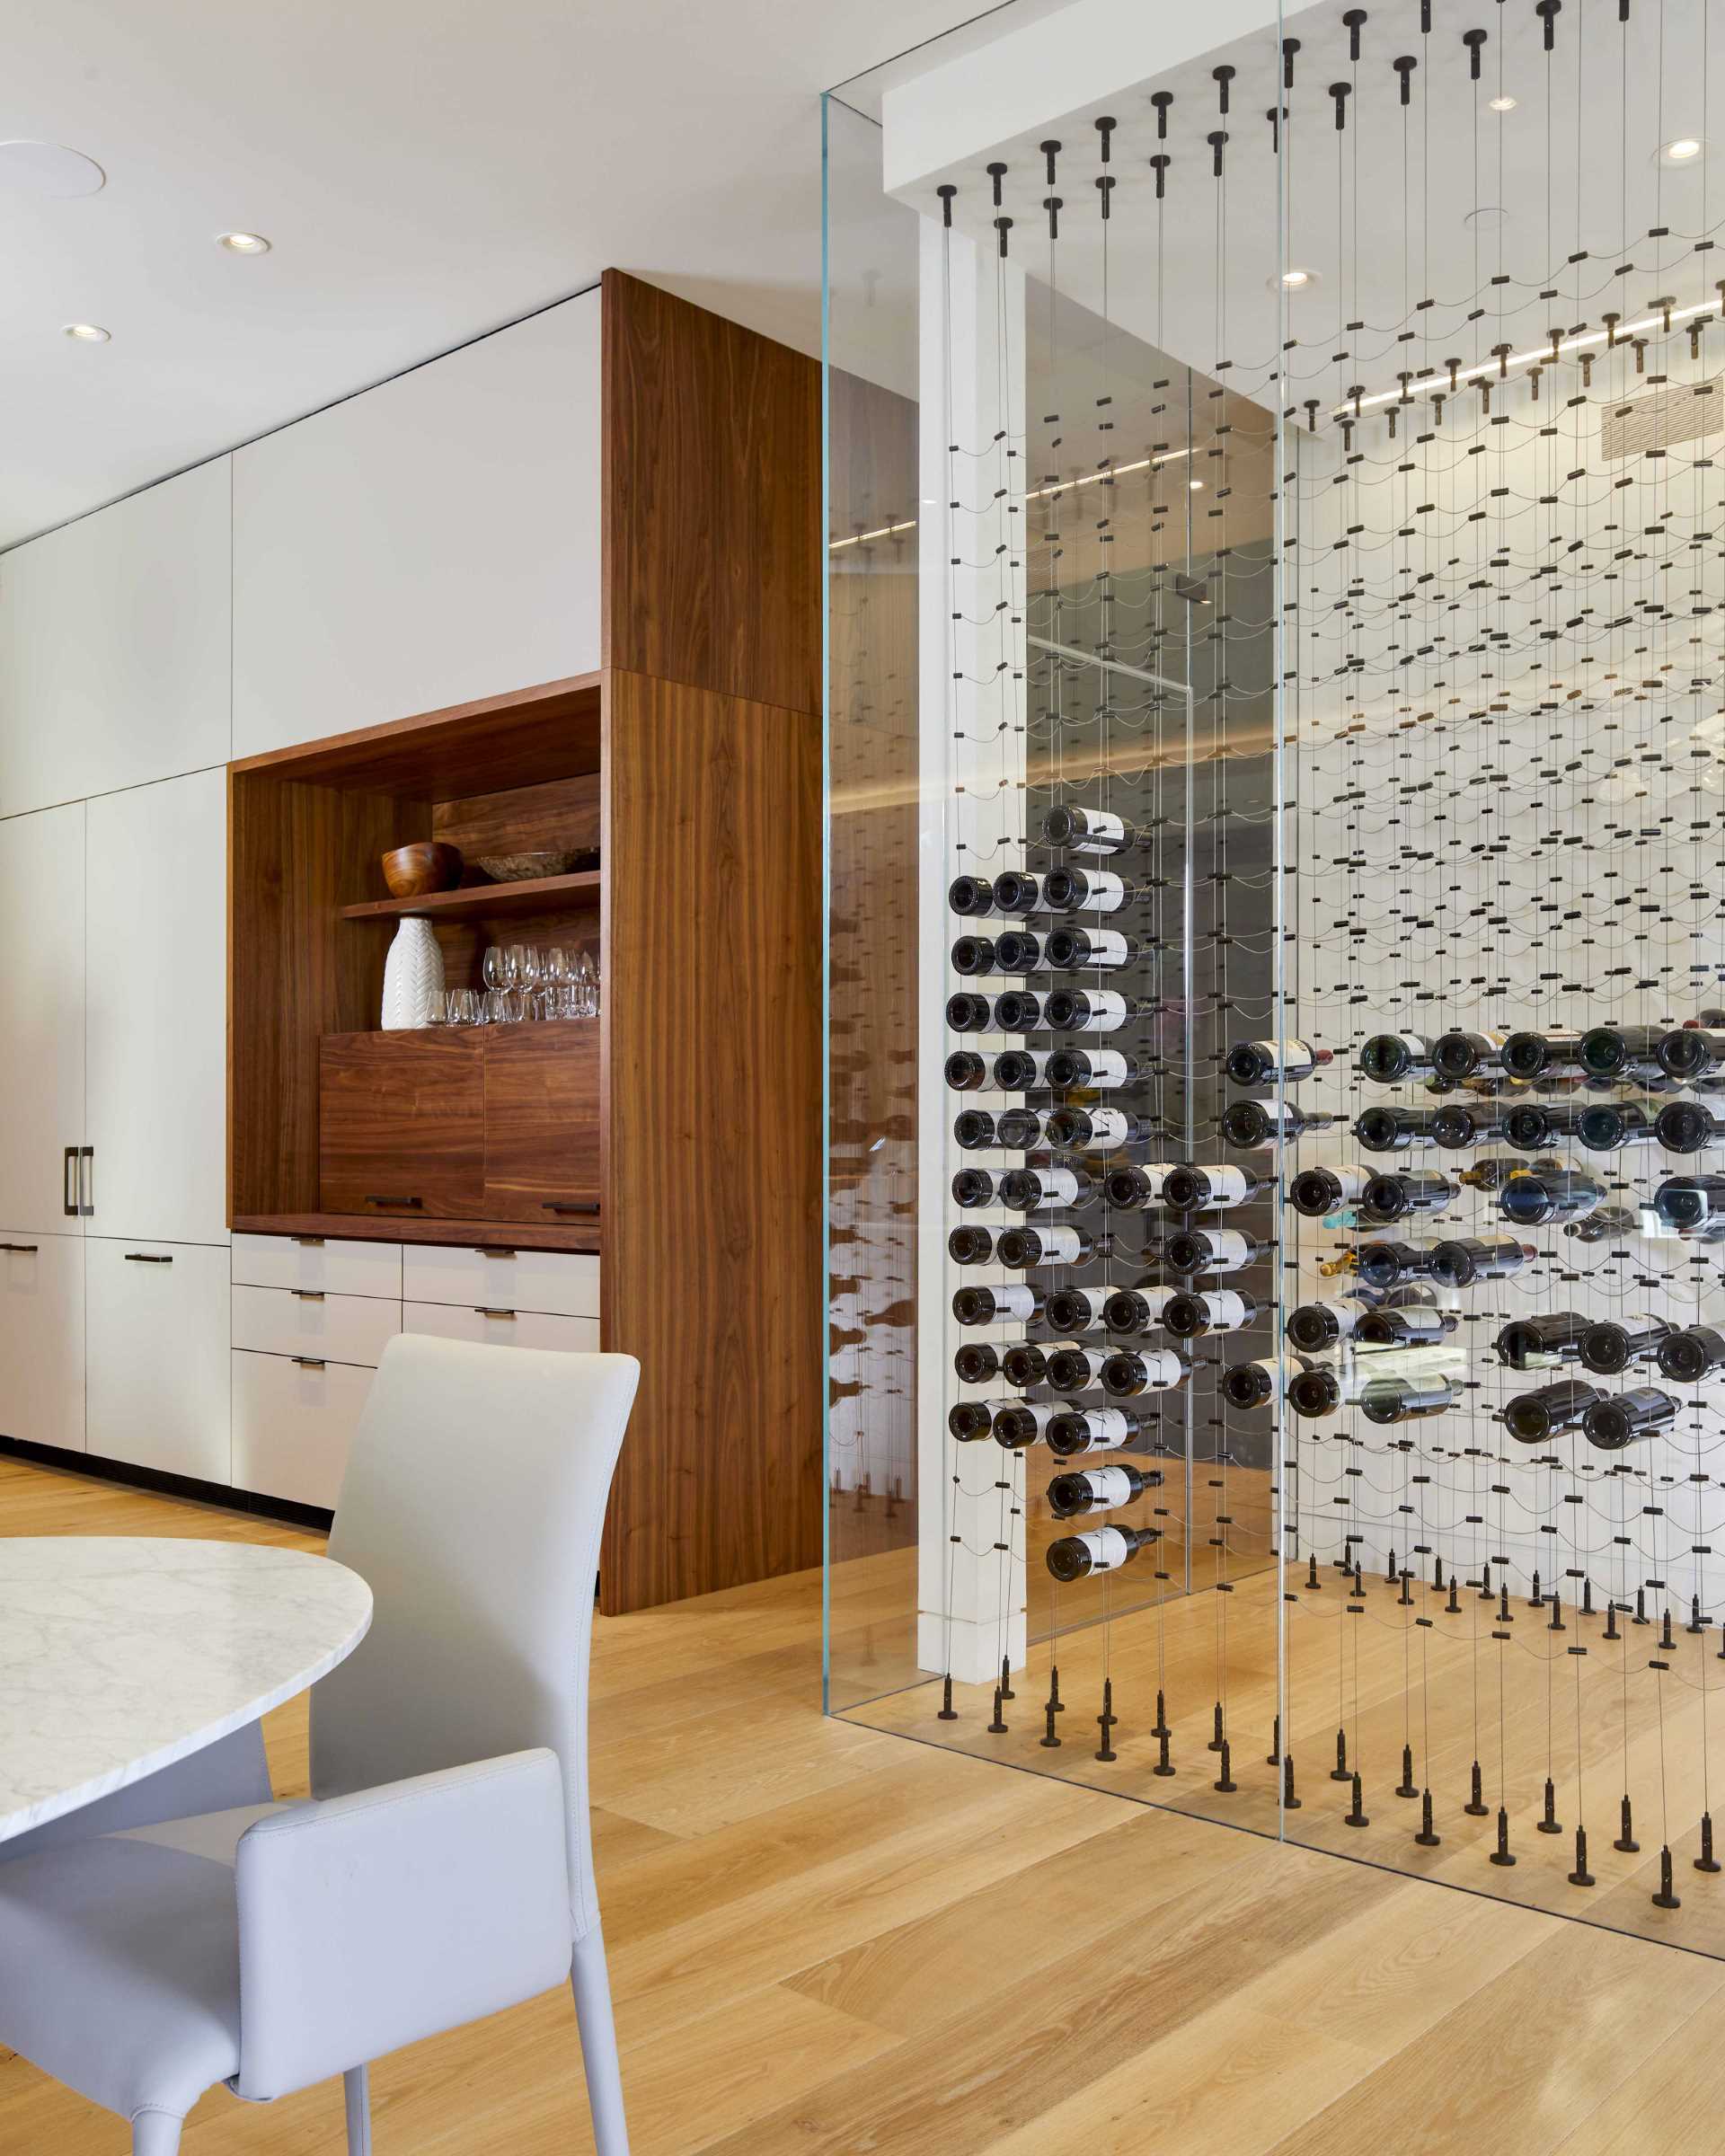 A modern kitchen with a glass-enclosed wine room.